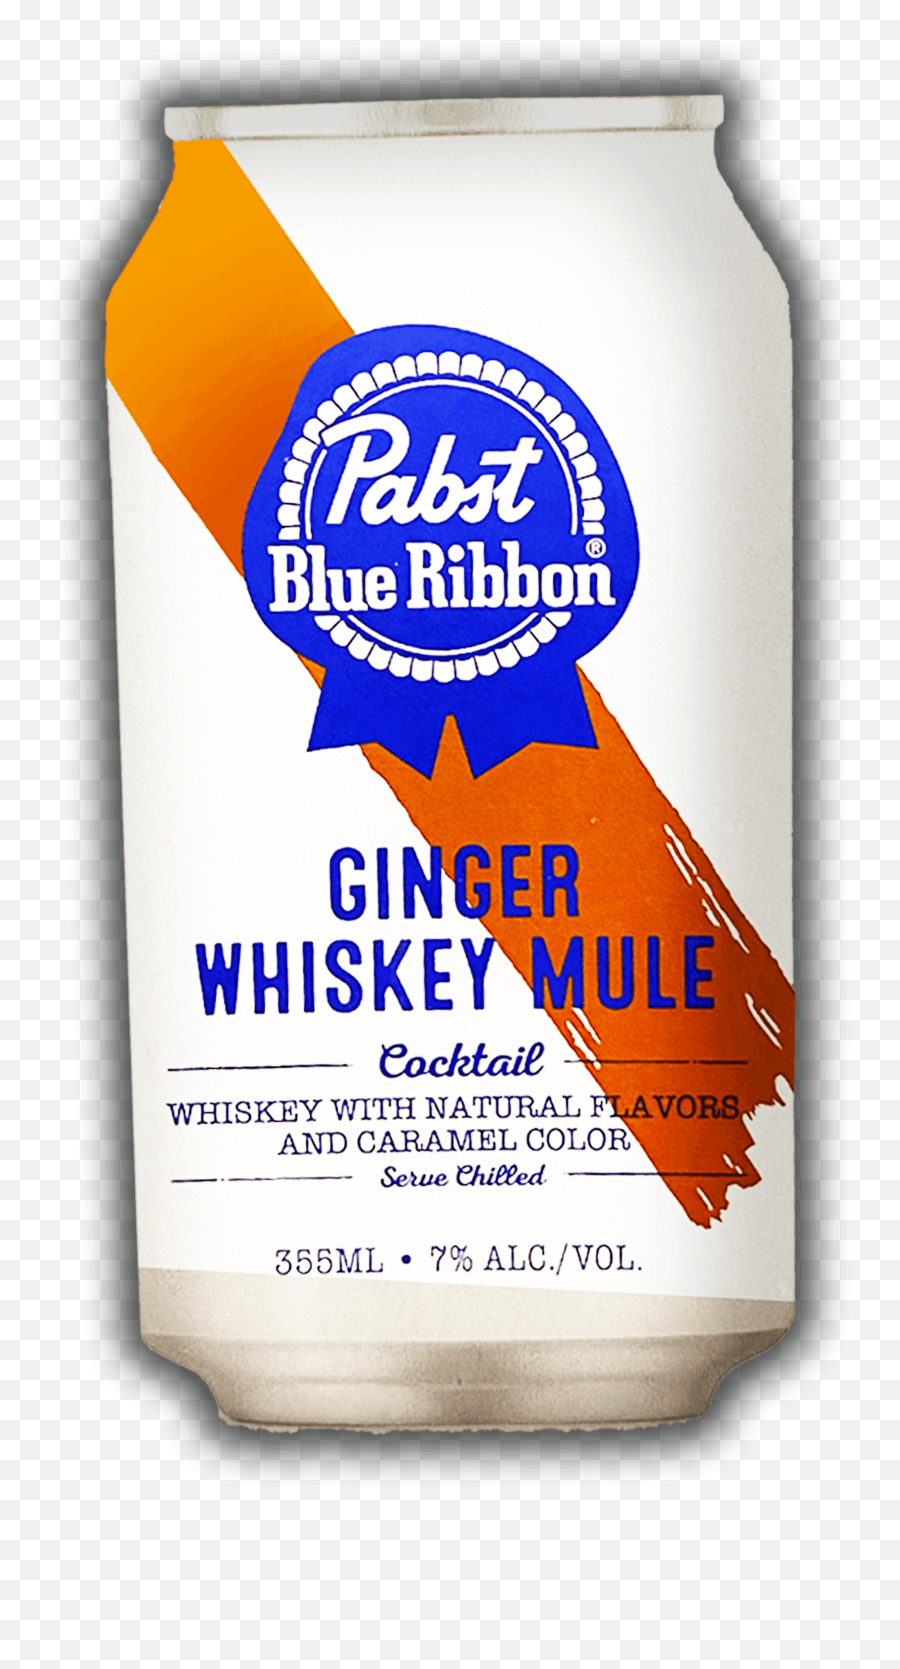 Pabst Brewing Company Ginger Whiskey Mule 4 Pack 12 Oz Can - Pabst Whiskey Ginger Mule Emoji,Pabst Blue Ribbon Logo